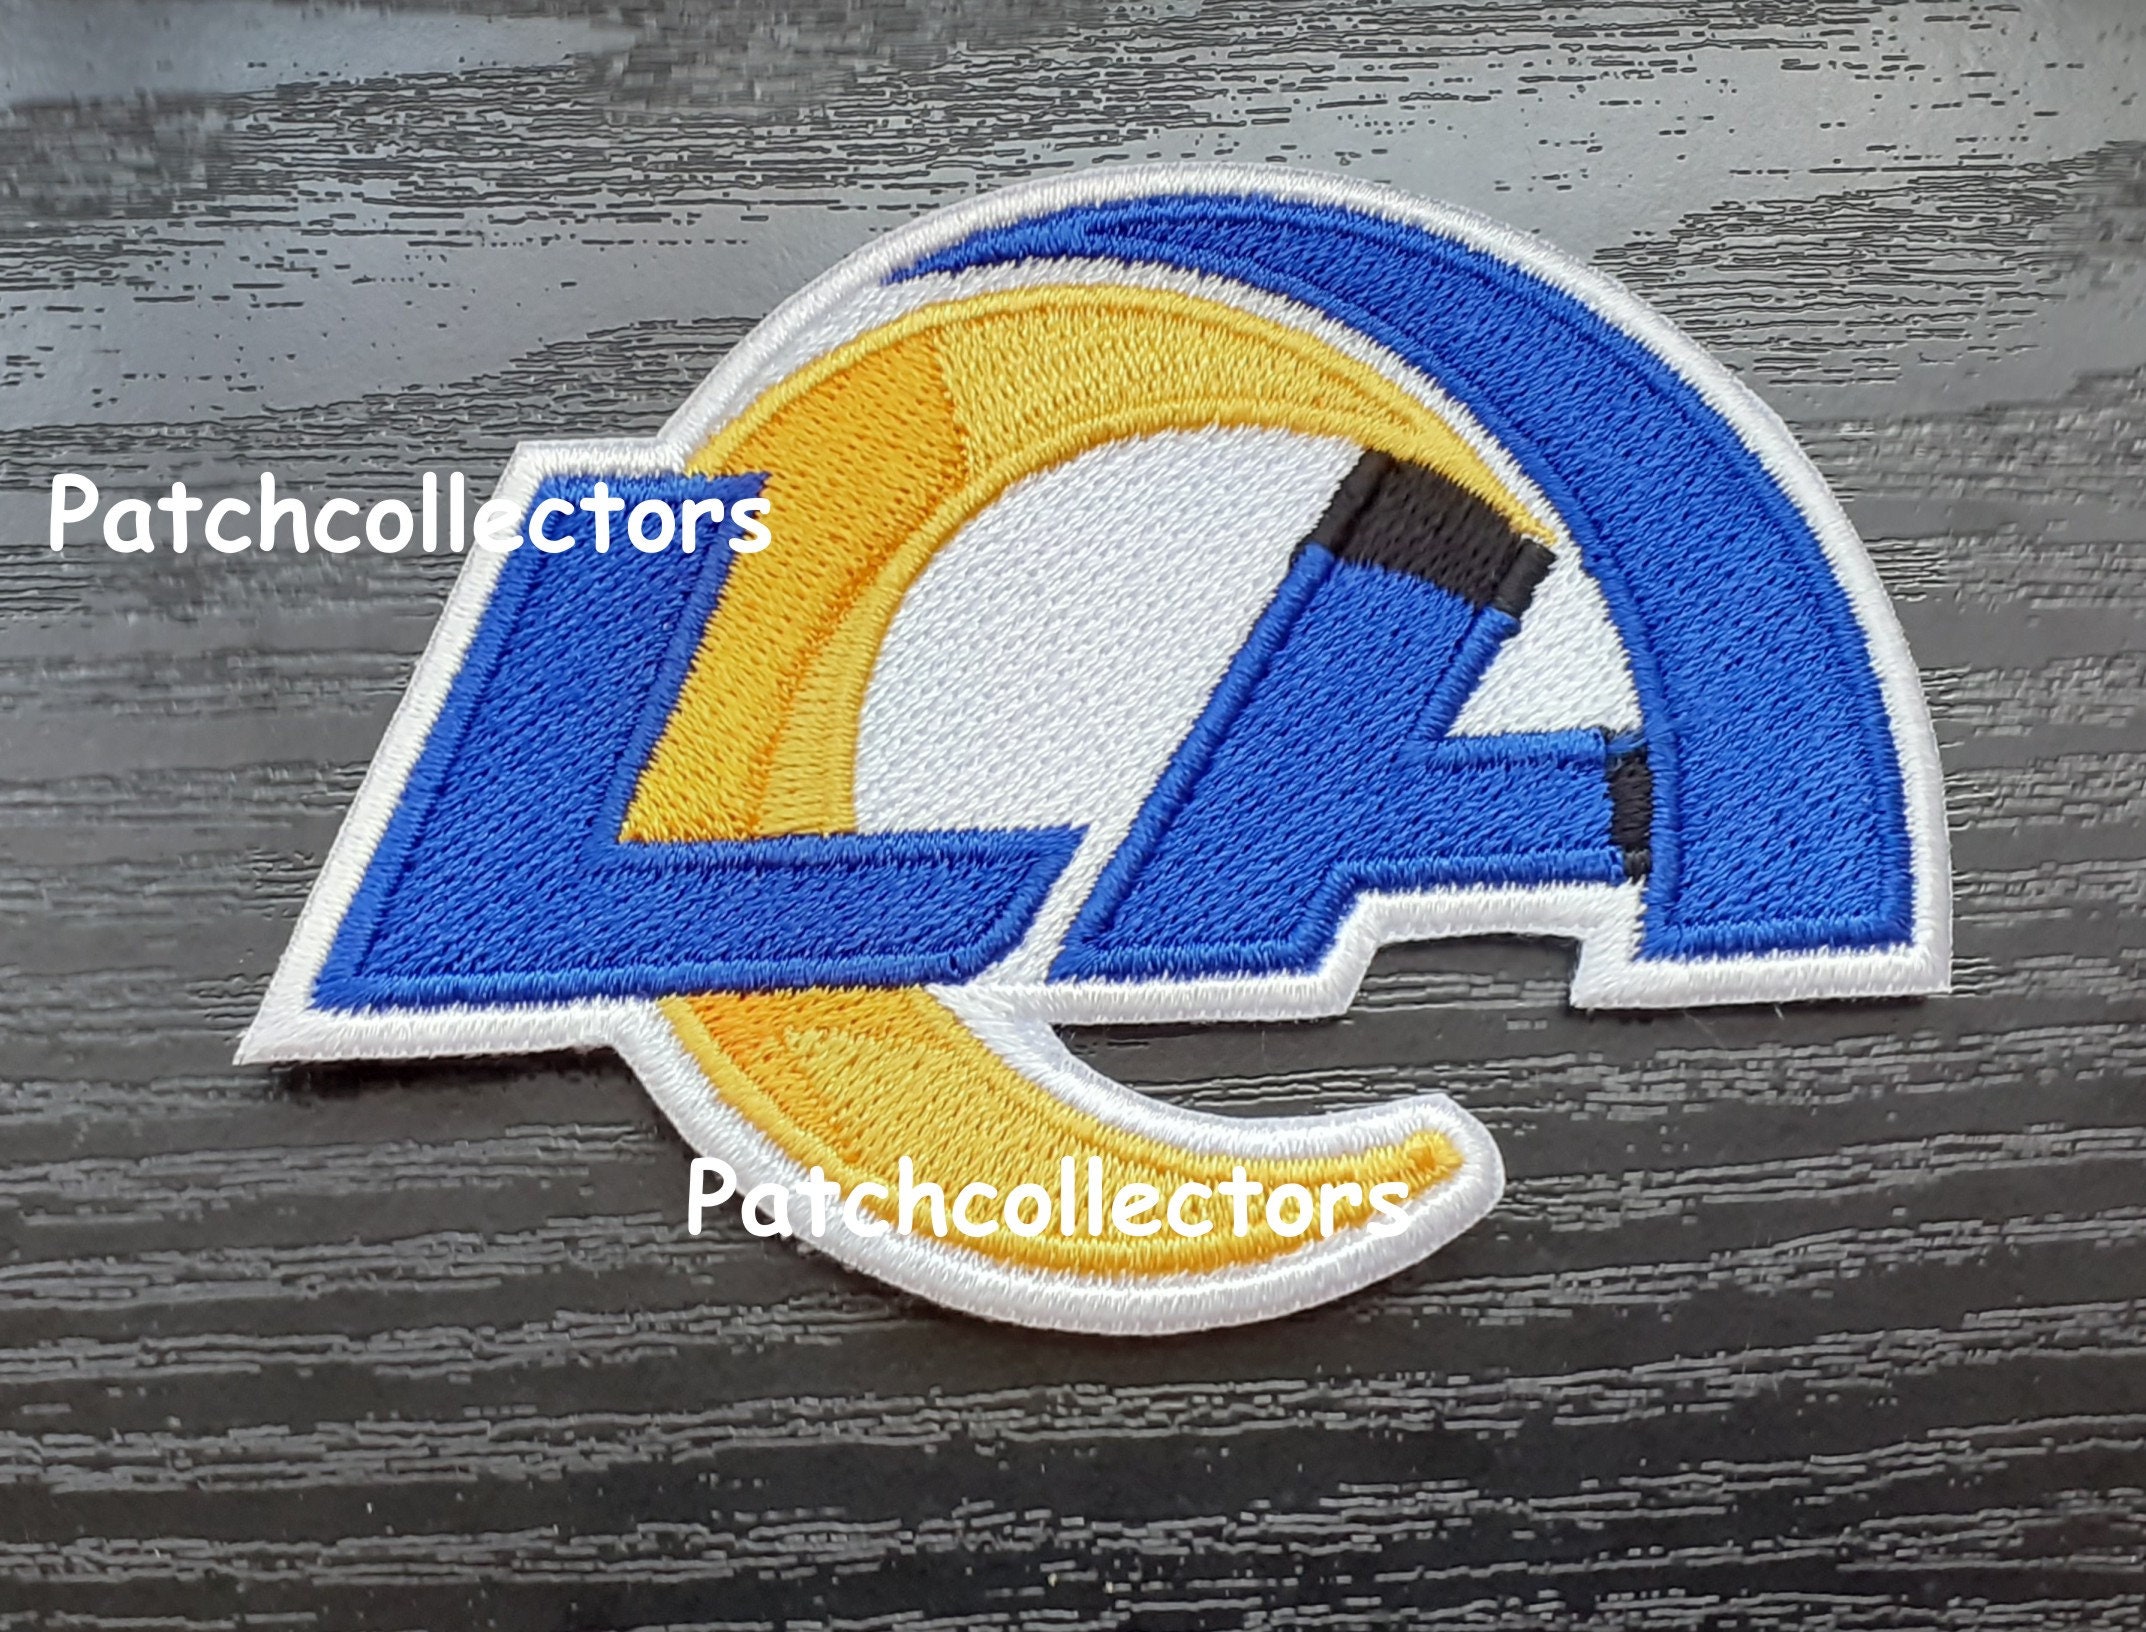 2020 La Rams Los Angeles Logo Patch Nfl Football Usa Sports Superbowl Jersey Sew On Embroidery Patches